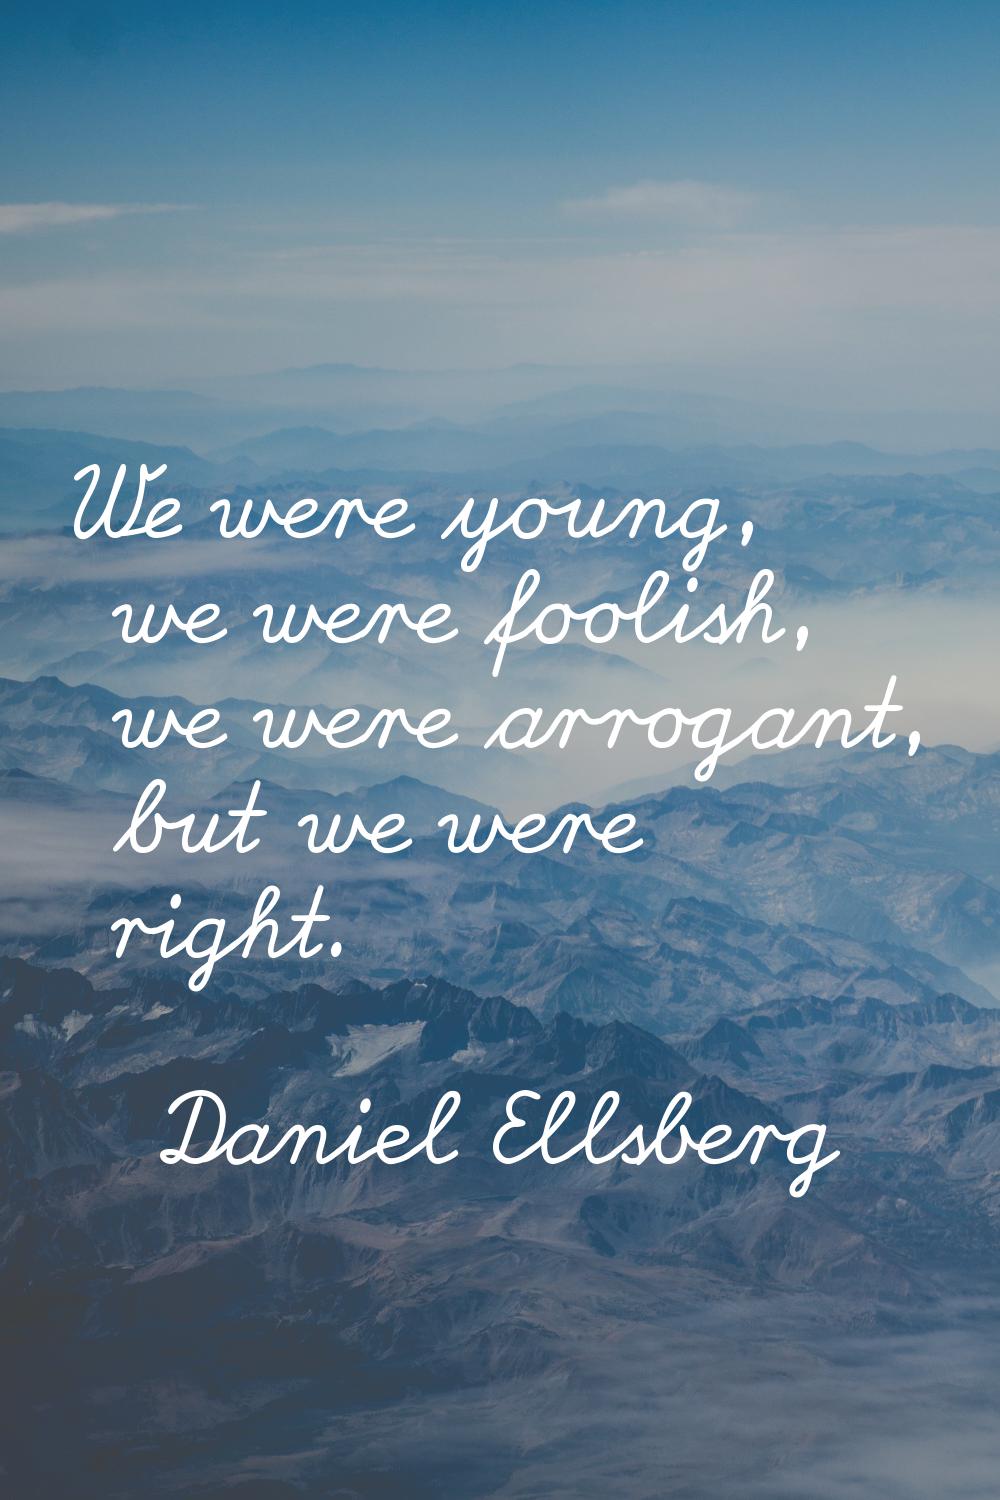 We were young, we were foolish, we were arrogant, but we were right.